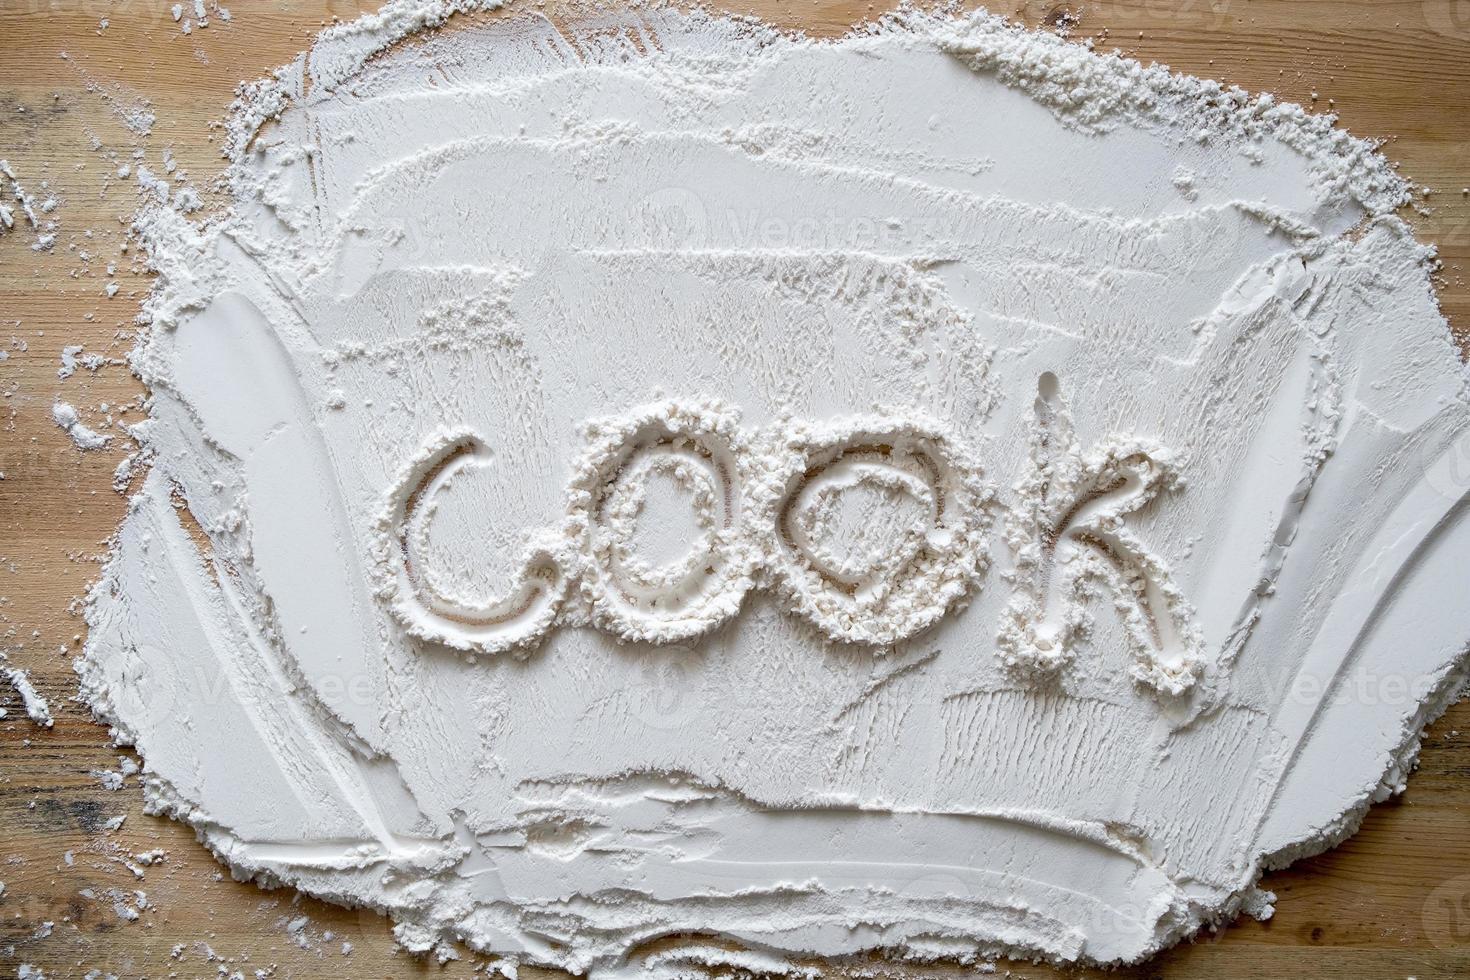 The handwritten word cook is written on flour sprinkled on a wooden table. photo